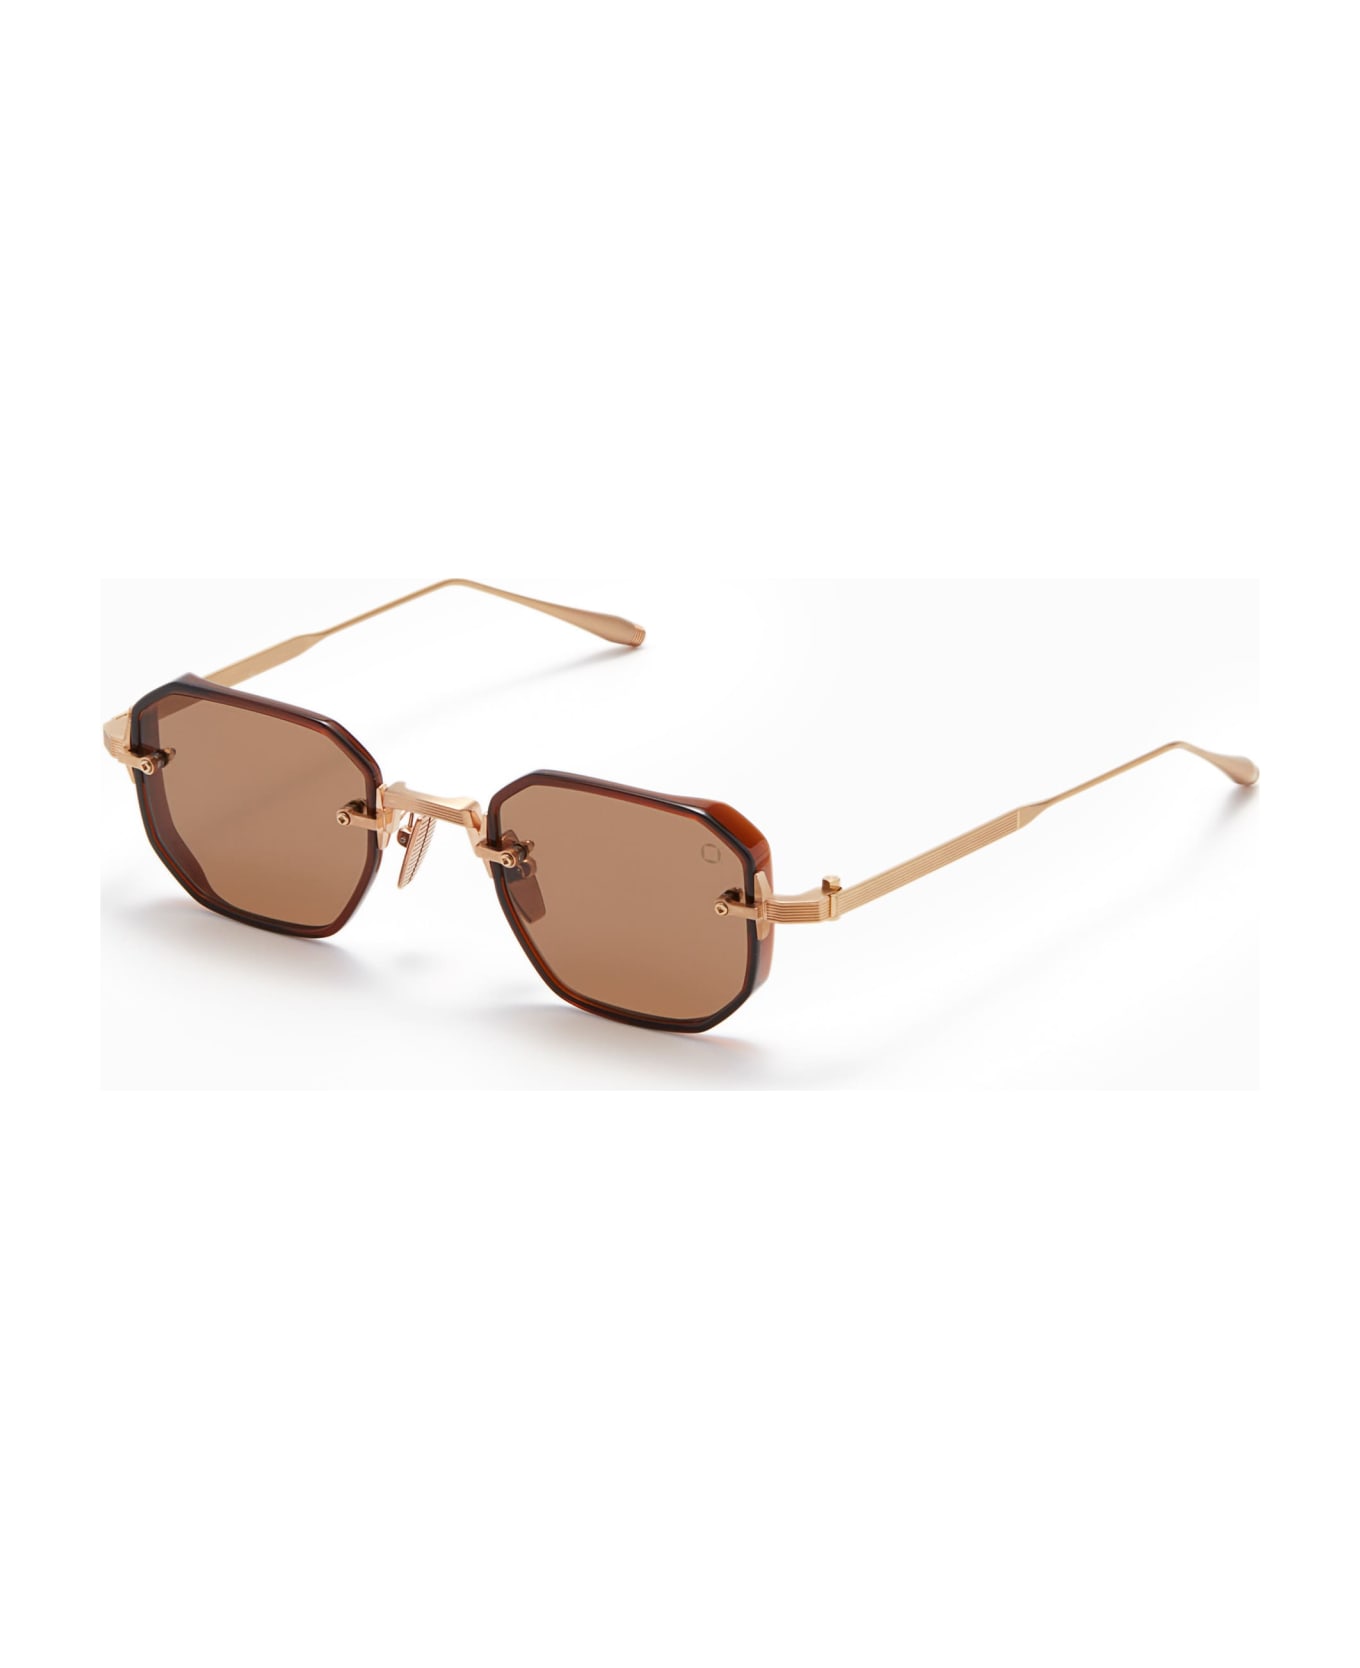 Akoni Juno-two - Brushed Gold / Brown Crystal Sunglasses - Gold サングラス